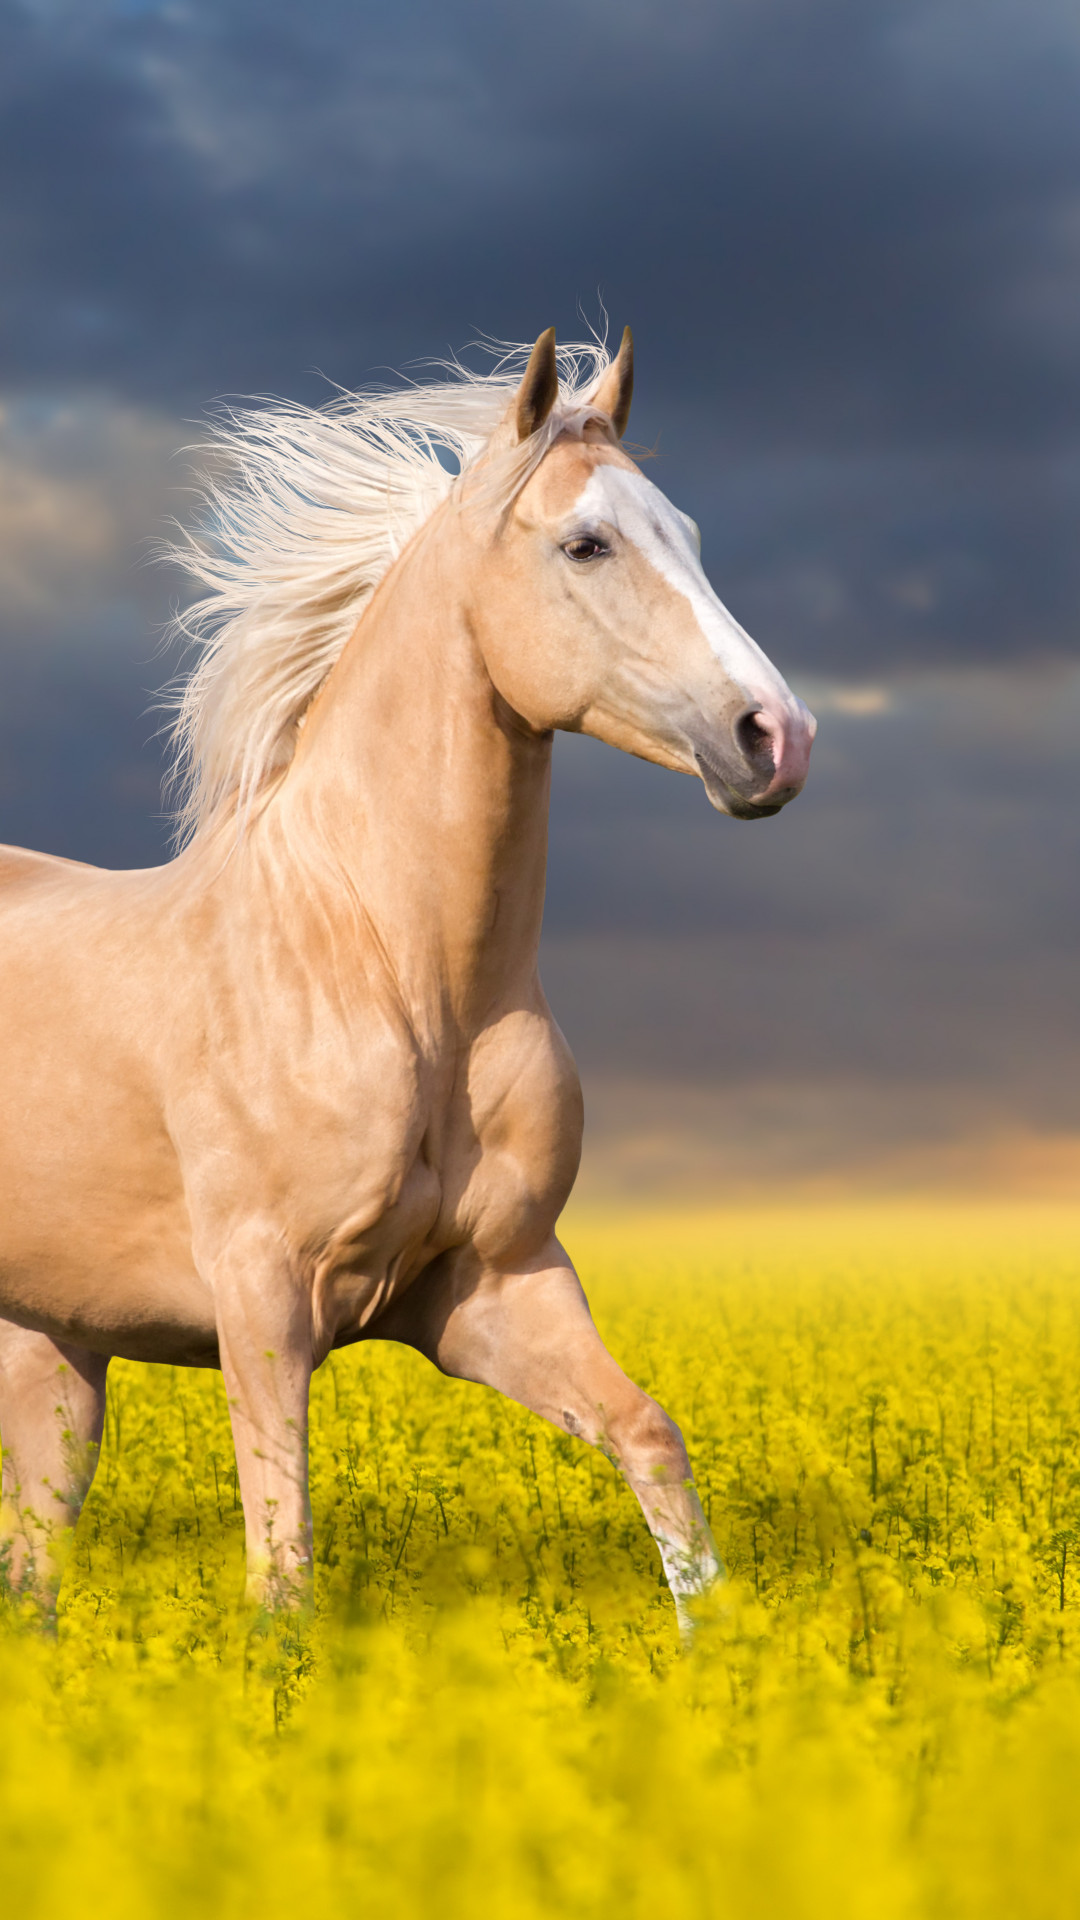 Horse Pictures For Wallpaper